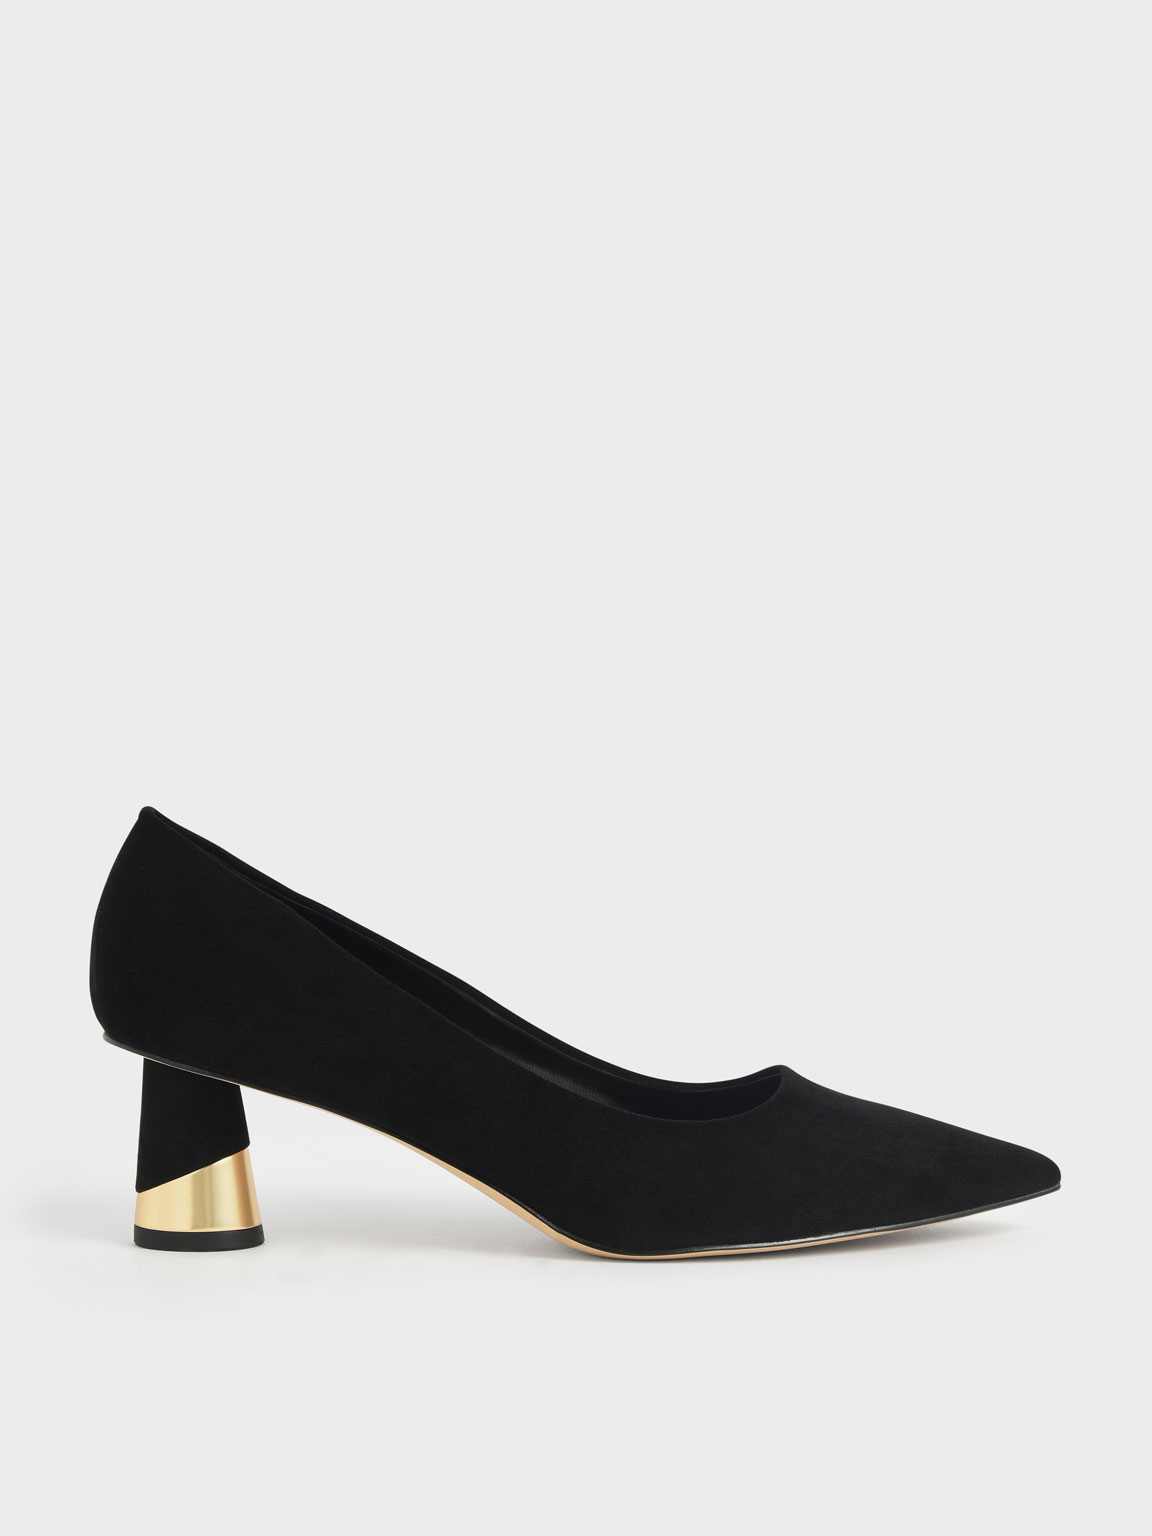 Charles & Keith Women's Lace Sculptural Heel Pumps